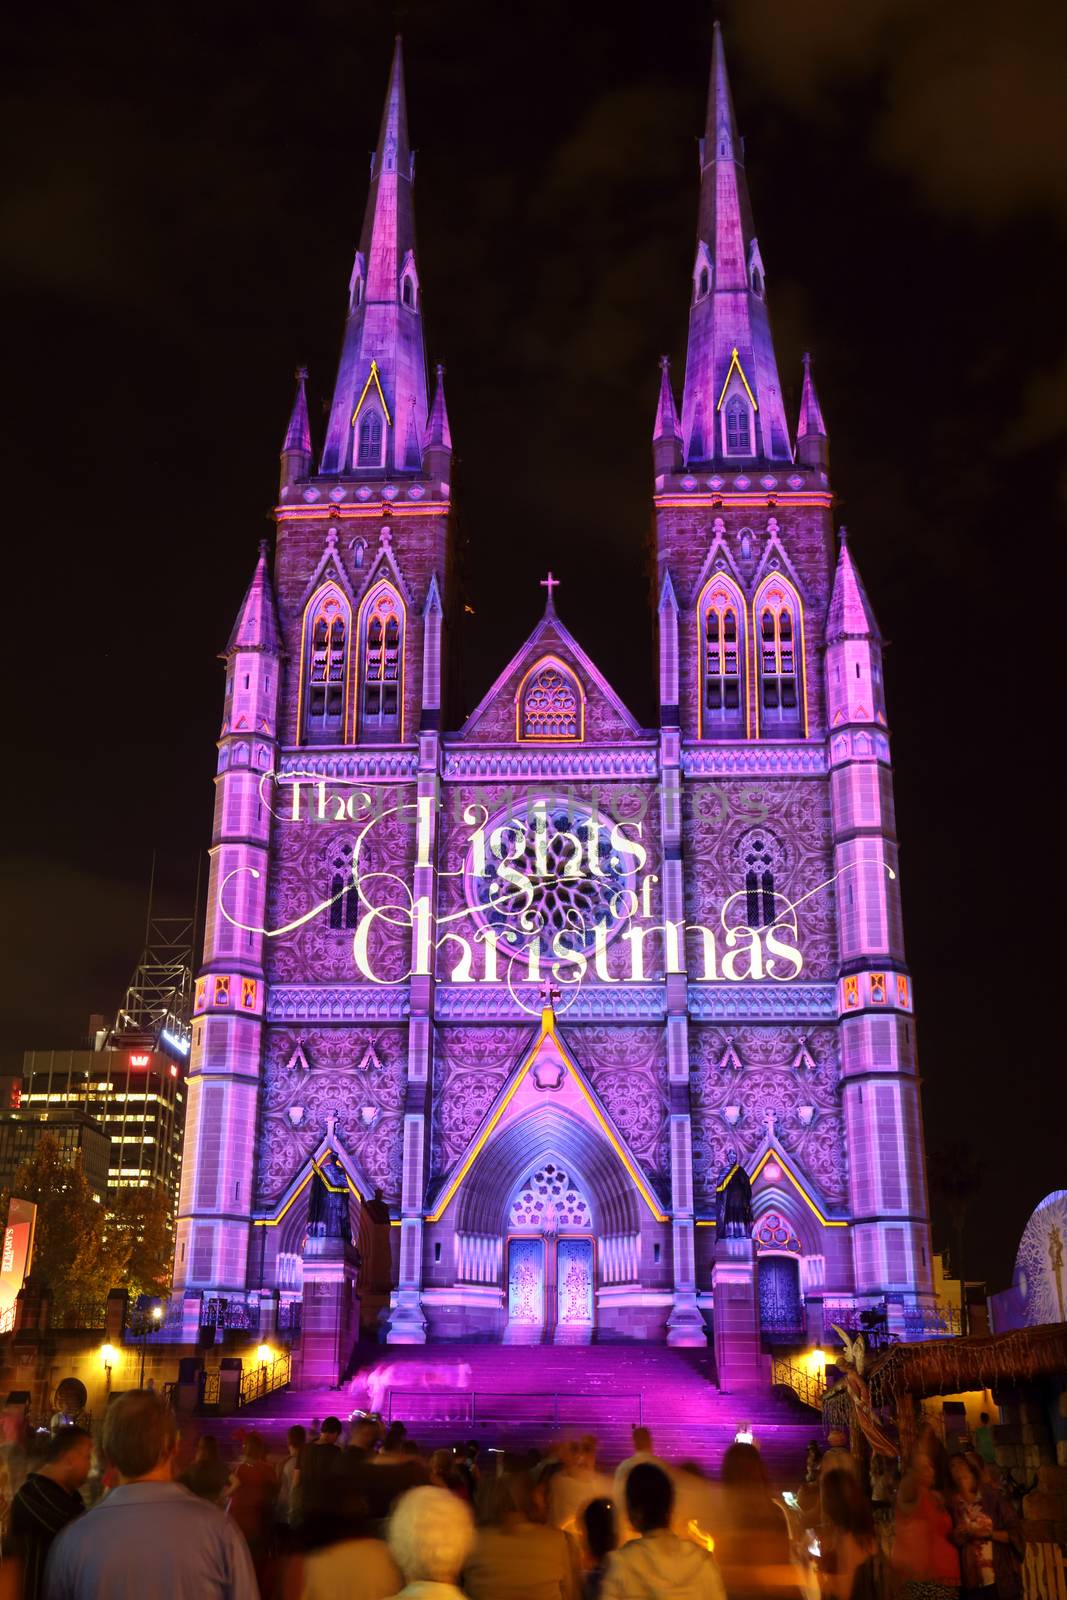 SYDNEY, AUSTRALIA - DECEMBER 23, 2014; Crowds of people on the forecourt of St Mary's Cathedral Sydney CBD watch and enjoy the Christmas lights display.  One of the many visions projected on the church building sandstone facade at Christmas time.